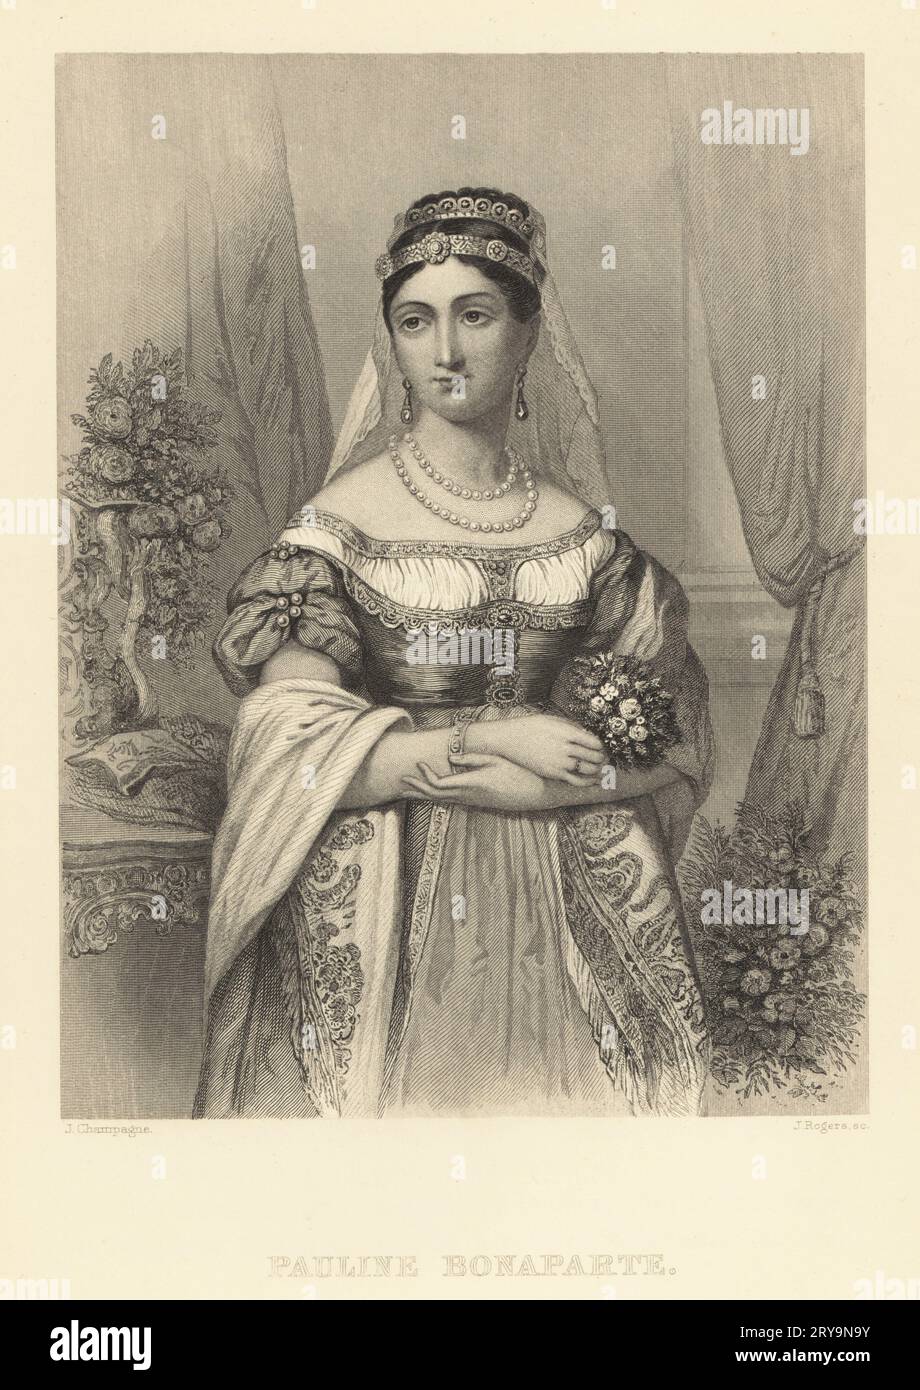 Pauline Bonaparte, younger sister of Napoloen, 1780-1825. Born Paula Maria Bonaparte Leclerc Borghese, imperial French princess, sovereign Duchess of Guastalla and the princess consort of Sulmona and Rossano. Steel engraving by John Rogers after a portrait by Jules Champagne from Frank B. Goodrich’s The Court of Napoleon or Society under the First Empire, J. B. Lippincott, Philadelphia, 1875. Stock Photo